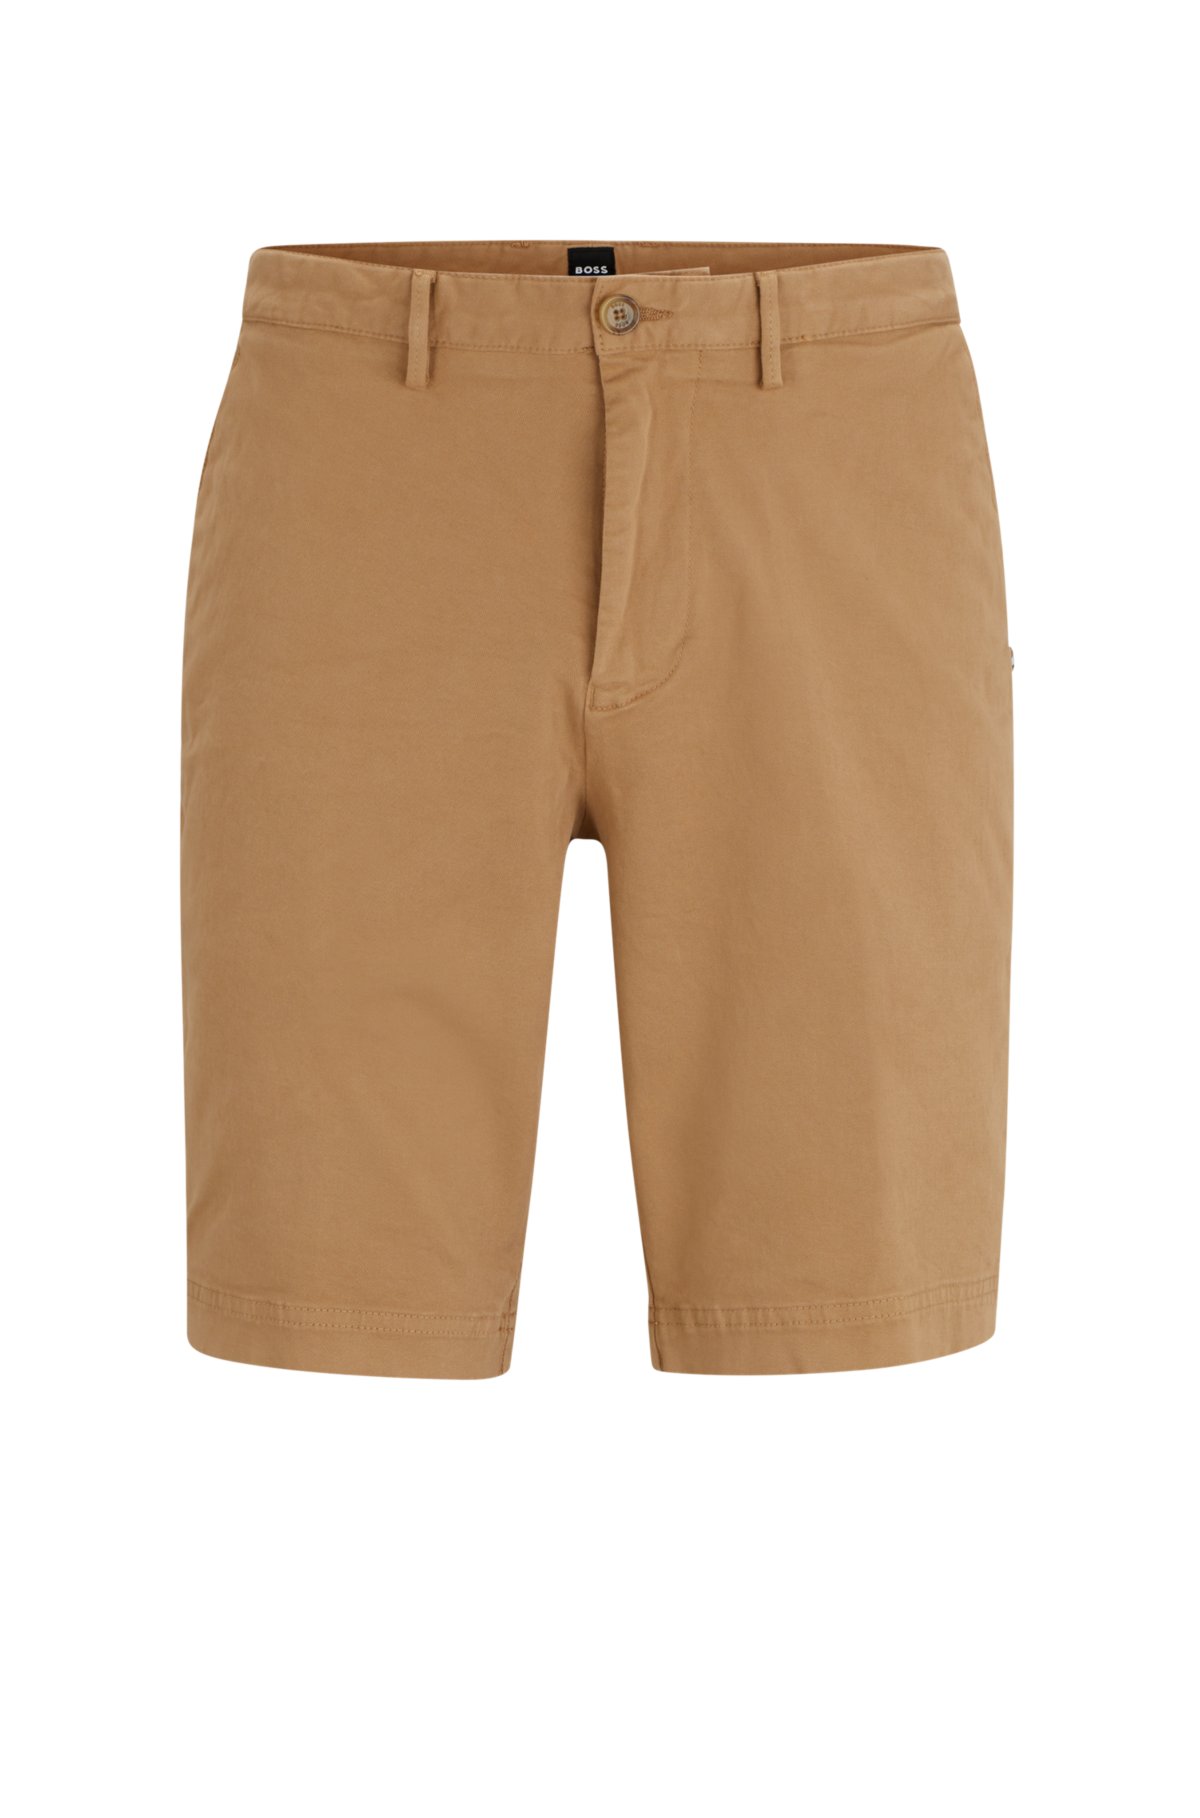 BOSS - Slim-fit shorts in stretch cotton